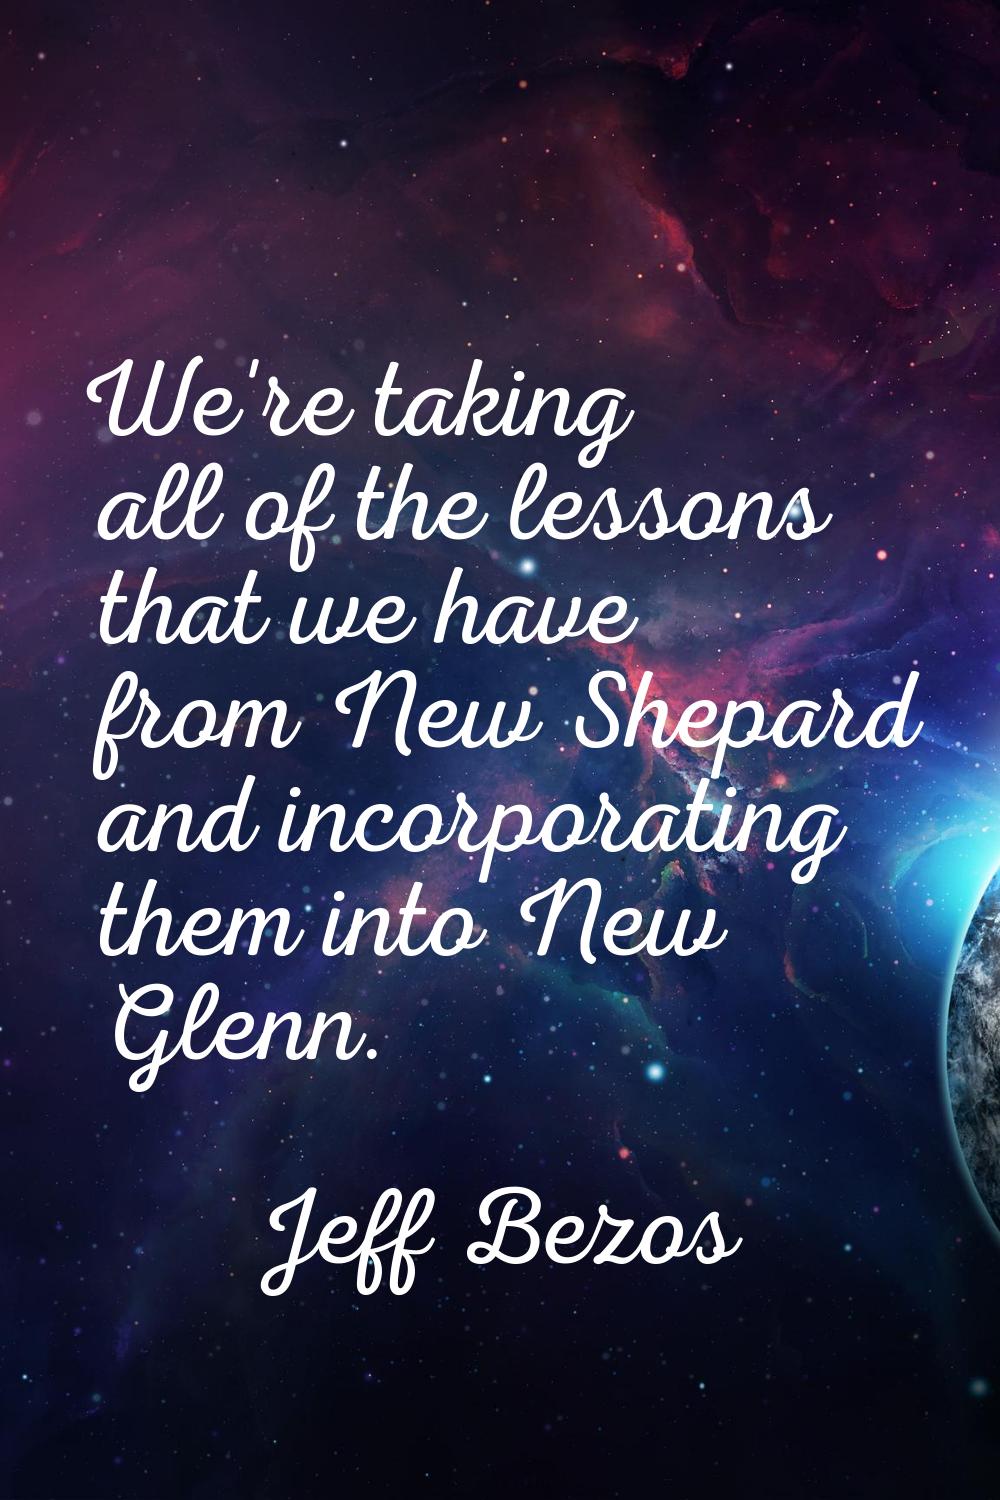 We're taking all of the lessons that we have from New Shepard and incorporating them into New Glenn